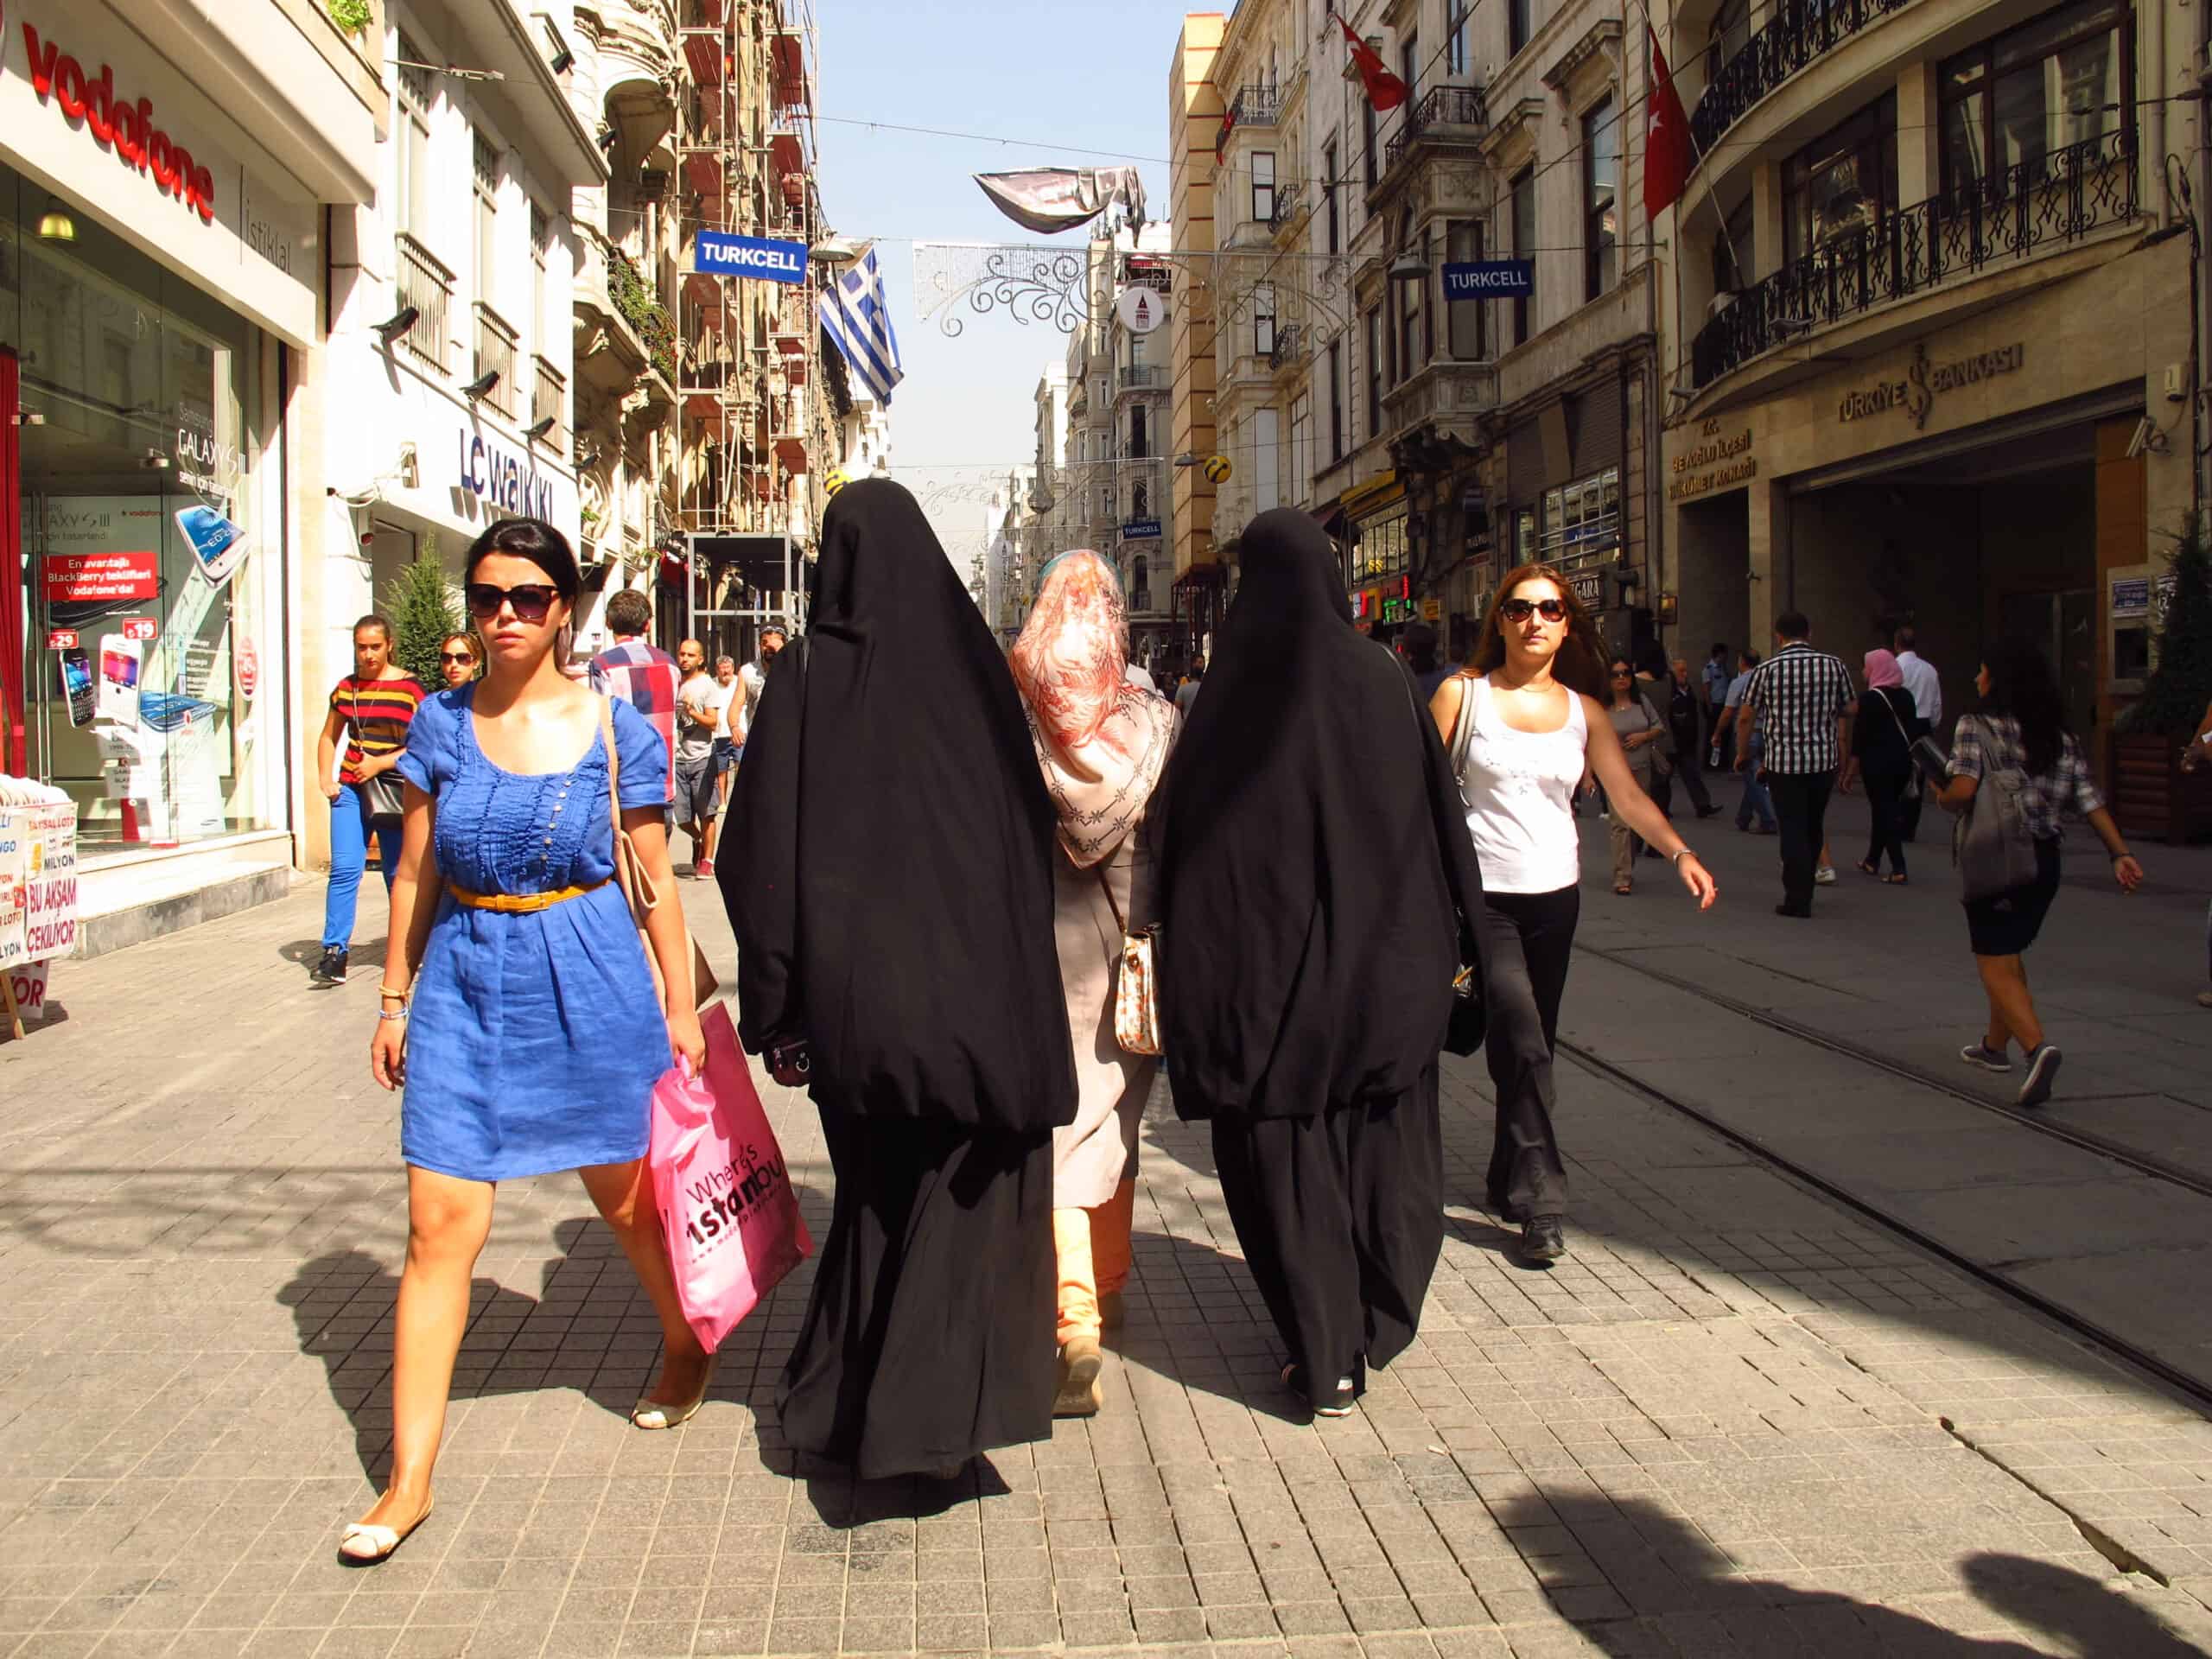 Different perspectives of the world in the same space. Two women walking in light summer dresses, while two others are wearing a long black niqab. 